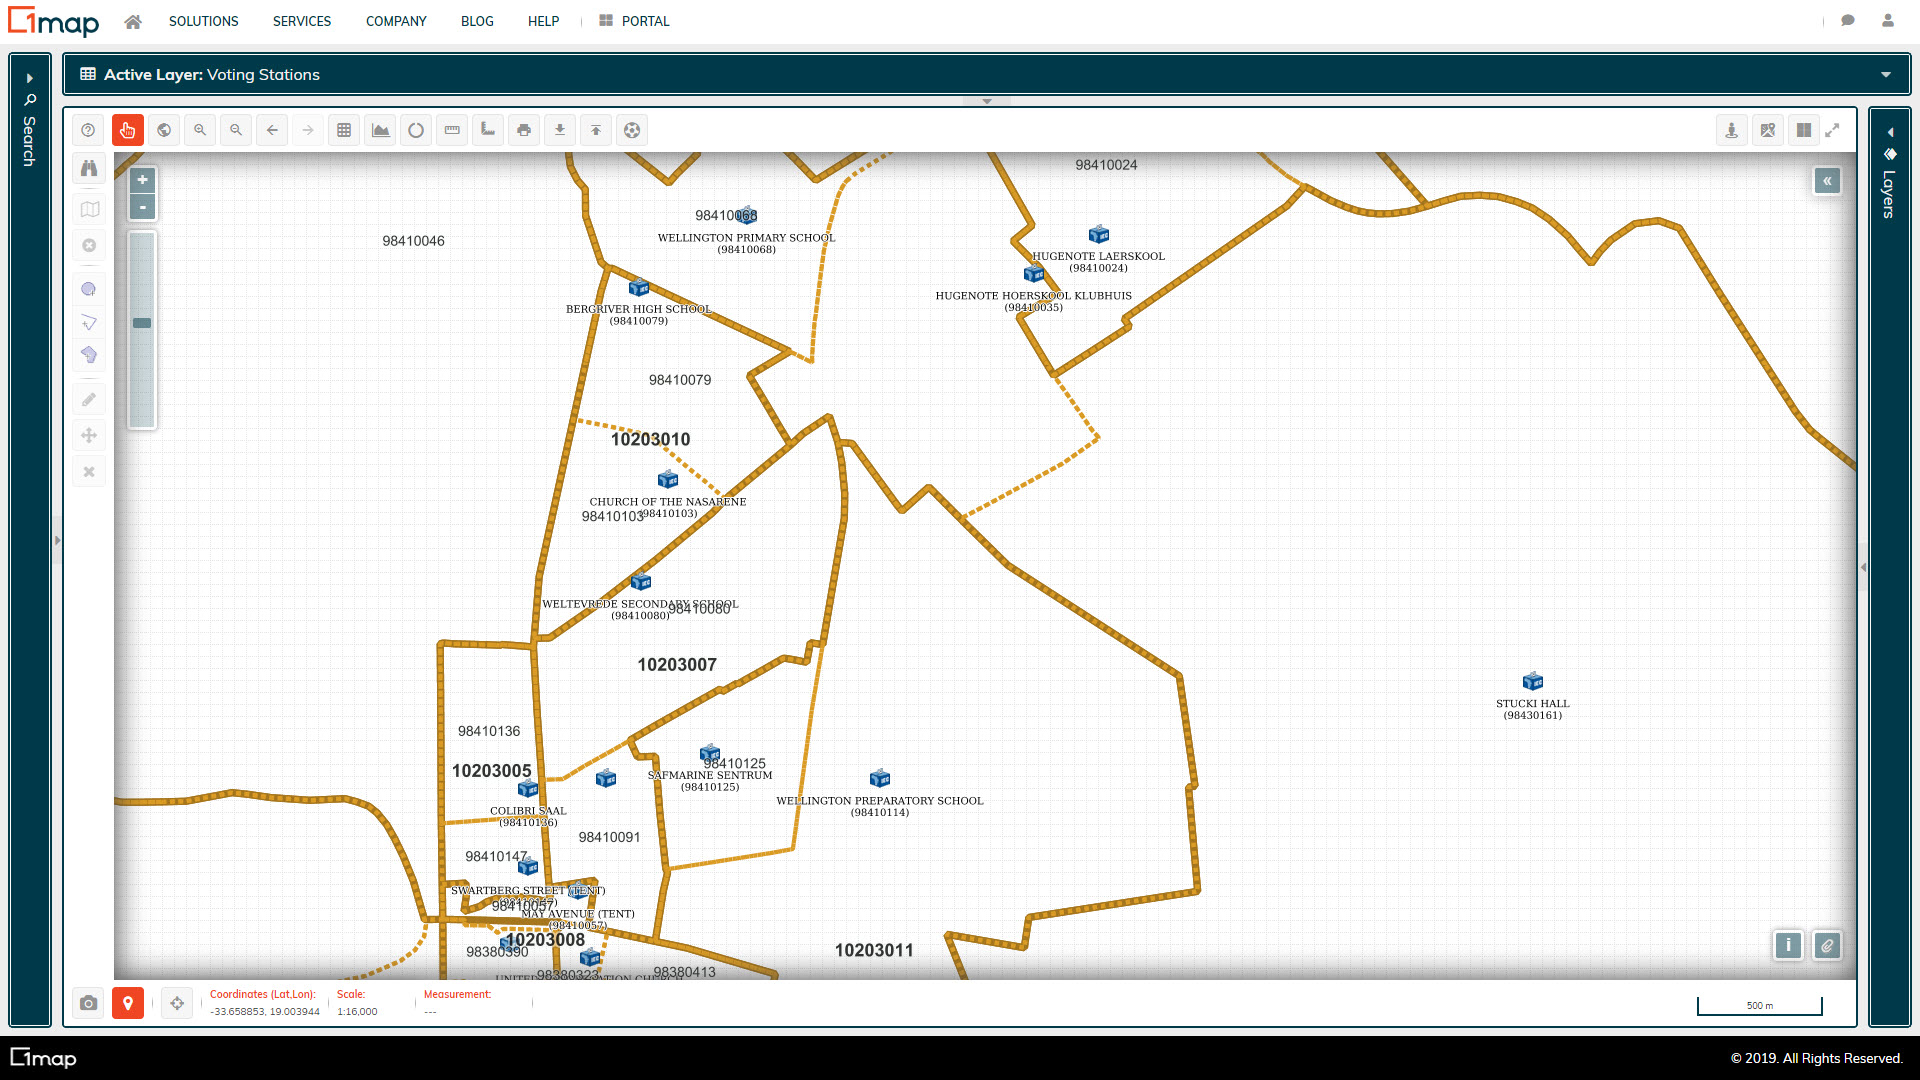 A screenshot of the IEC Voting Stations, Wards, and Districts layer.